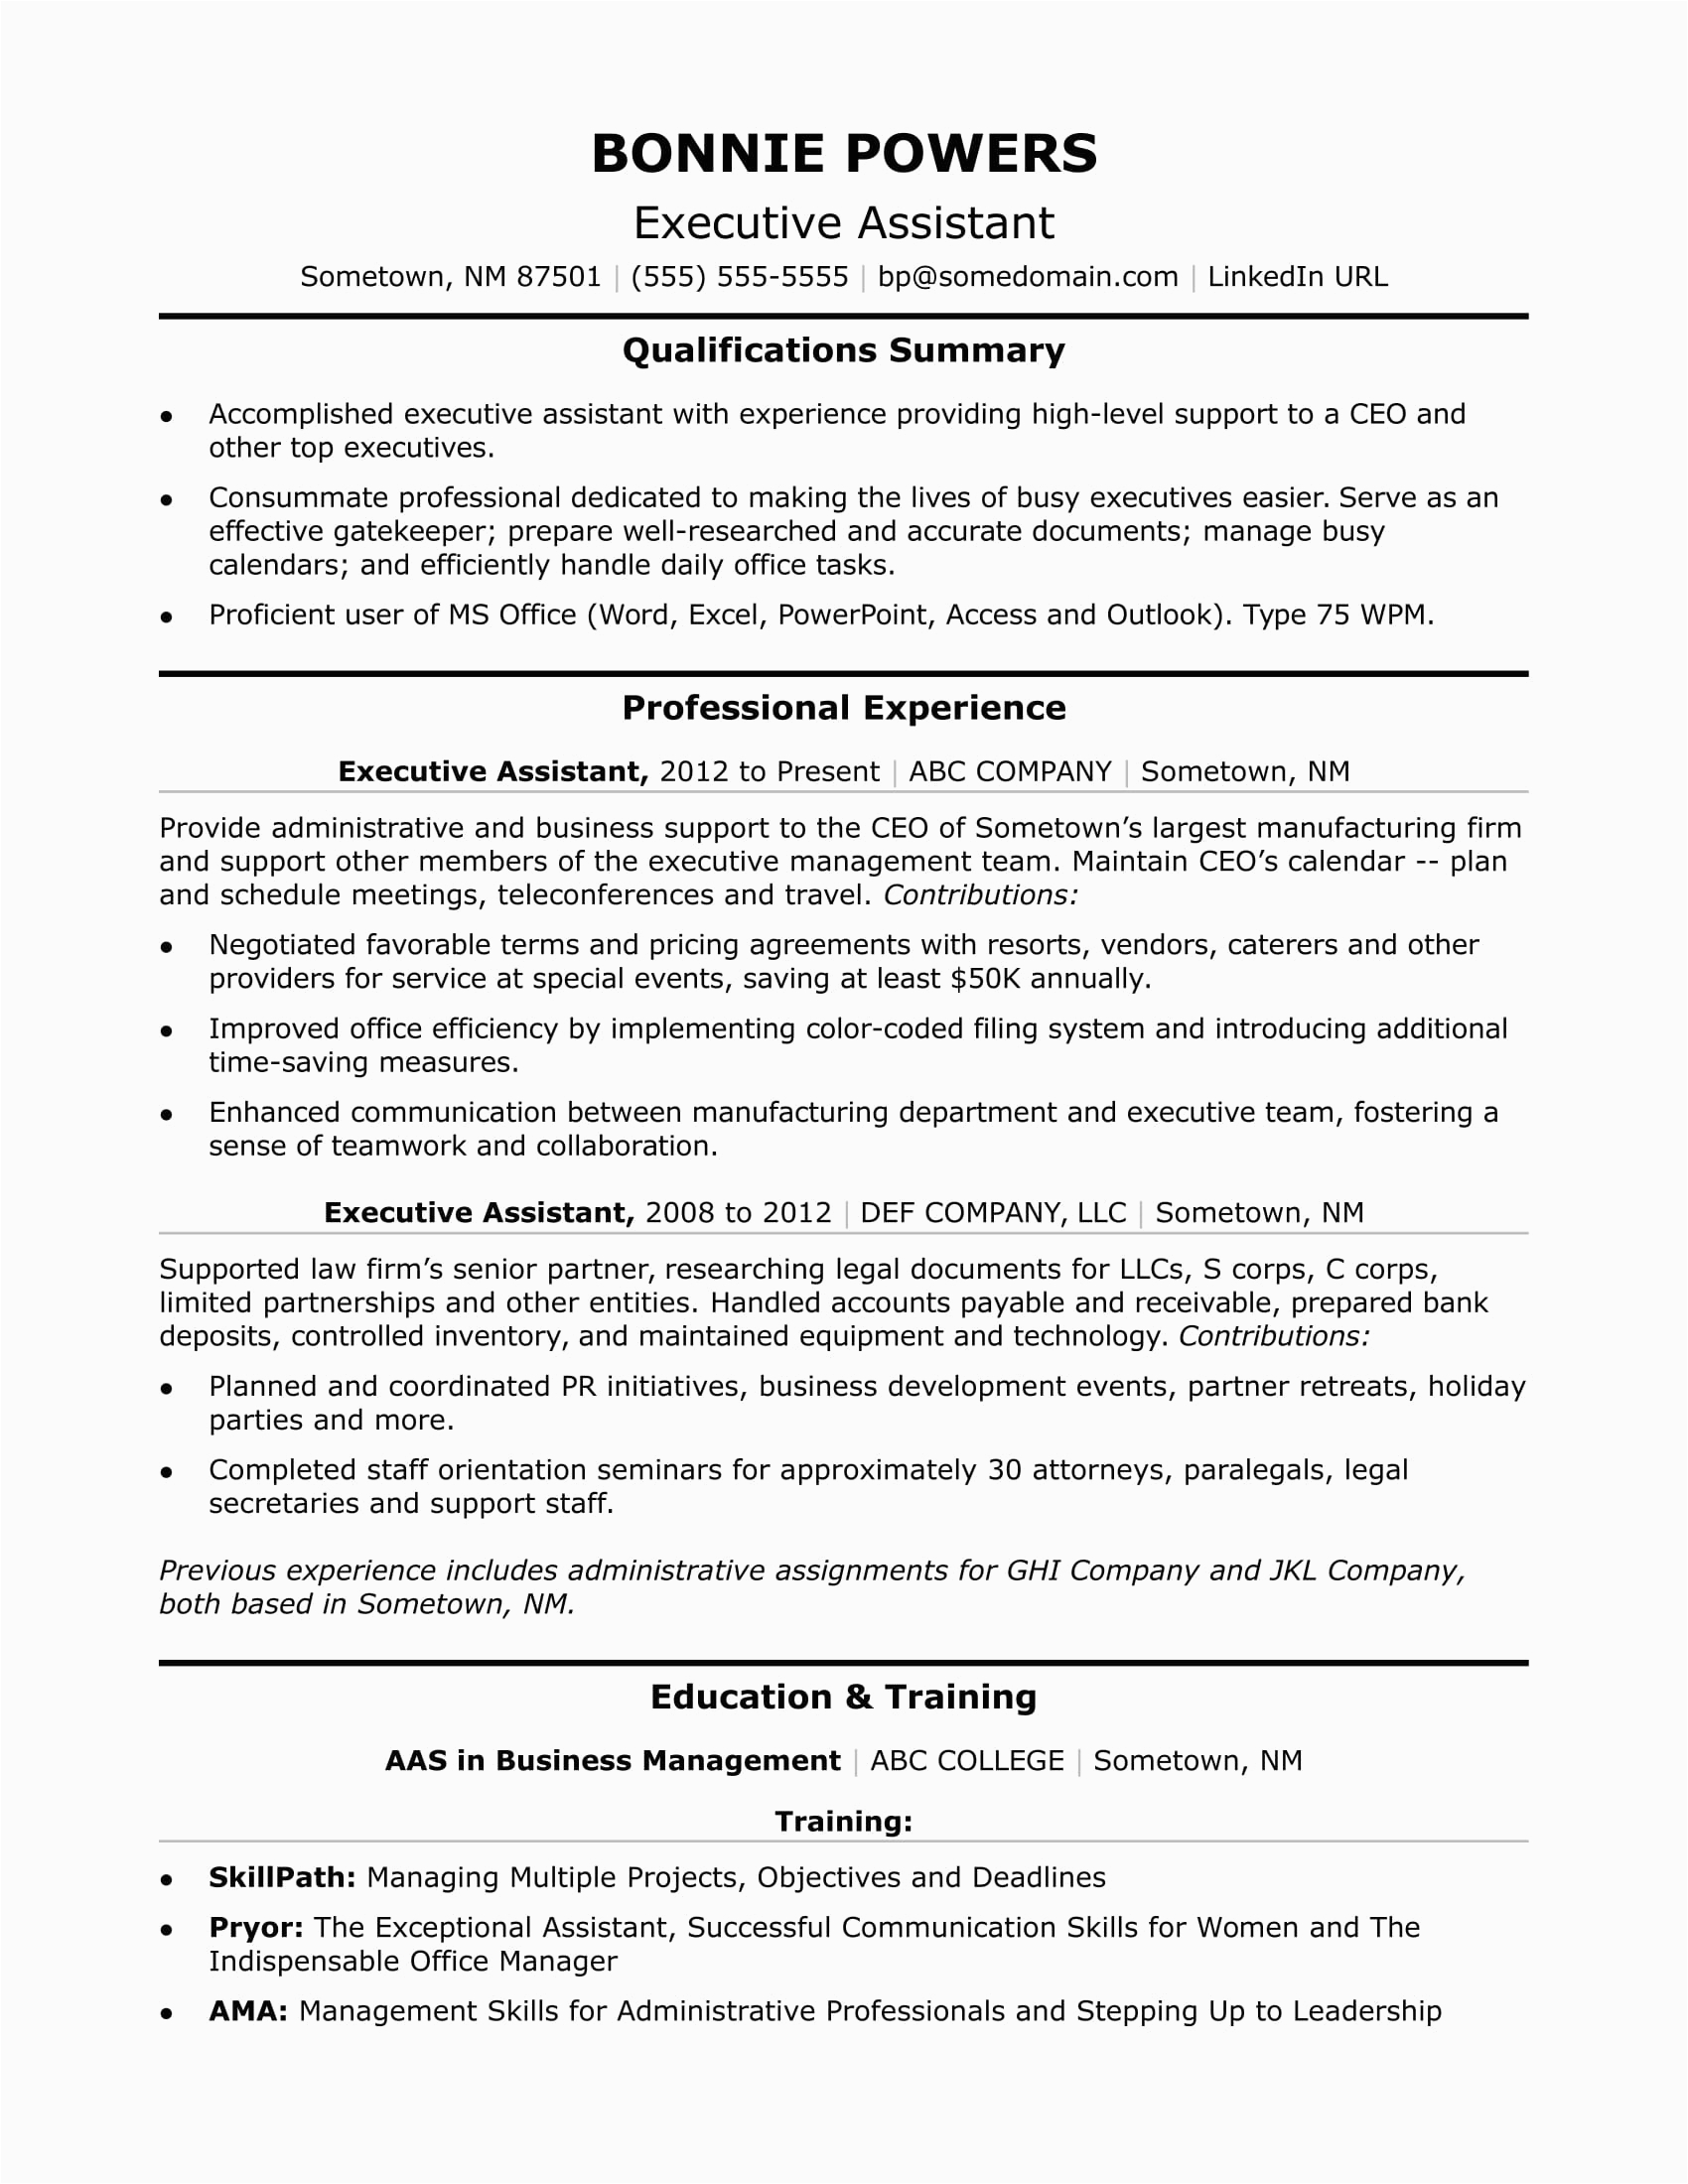 Sample Resume for Executive assistant Office Manager Executive Administrative assistant Resume Sample